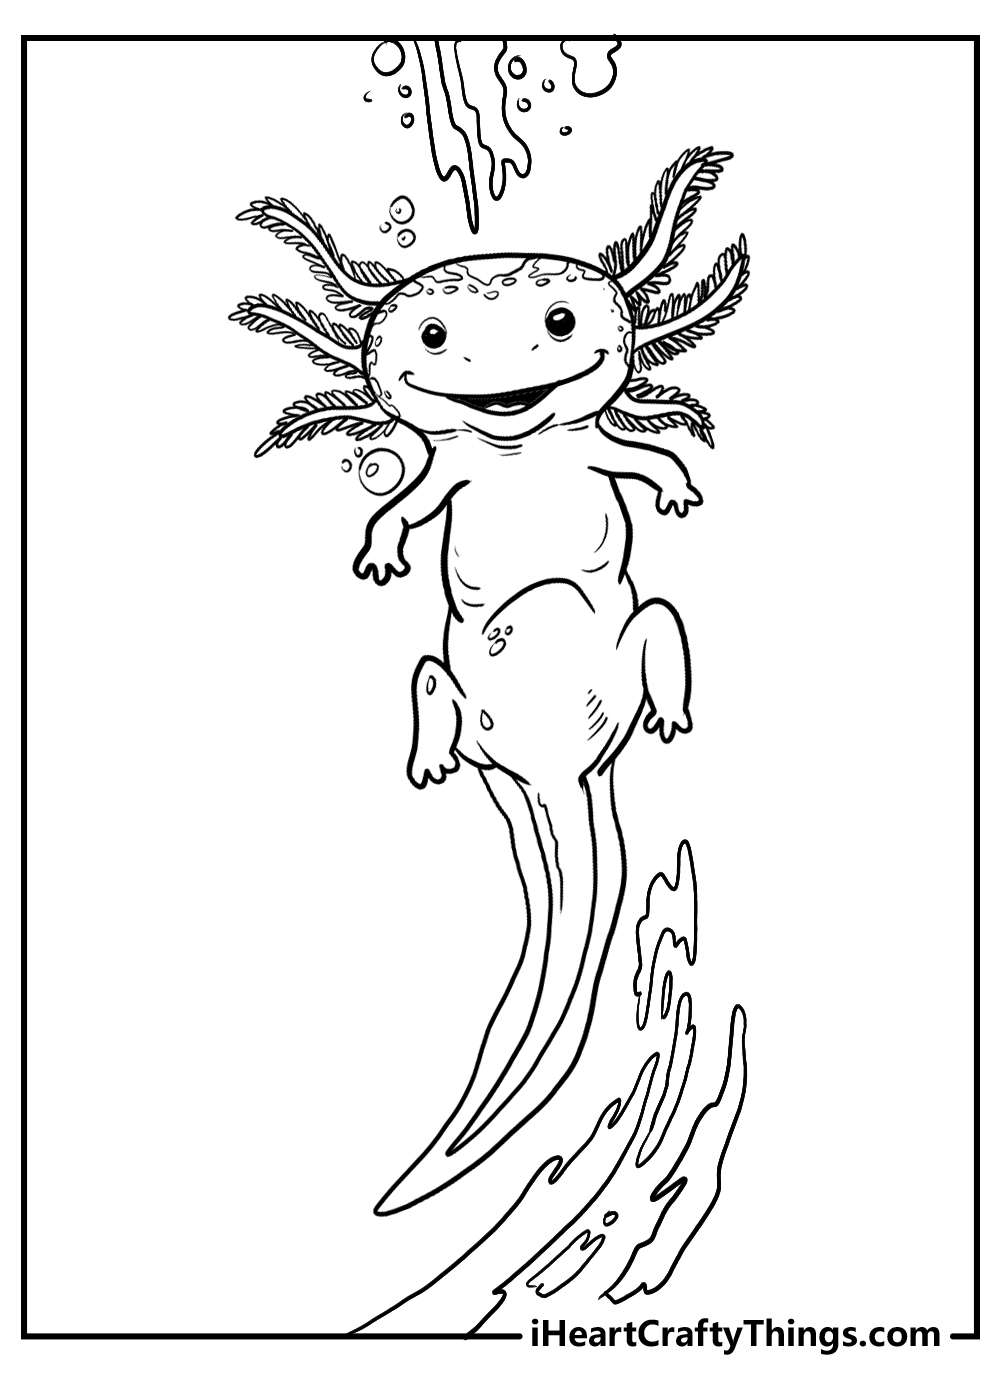 axolotl coloring pages for adults